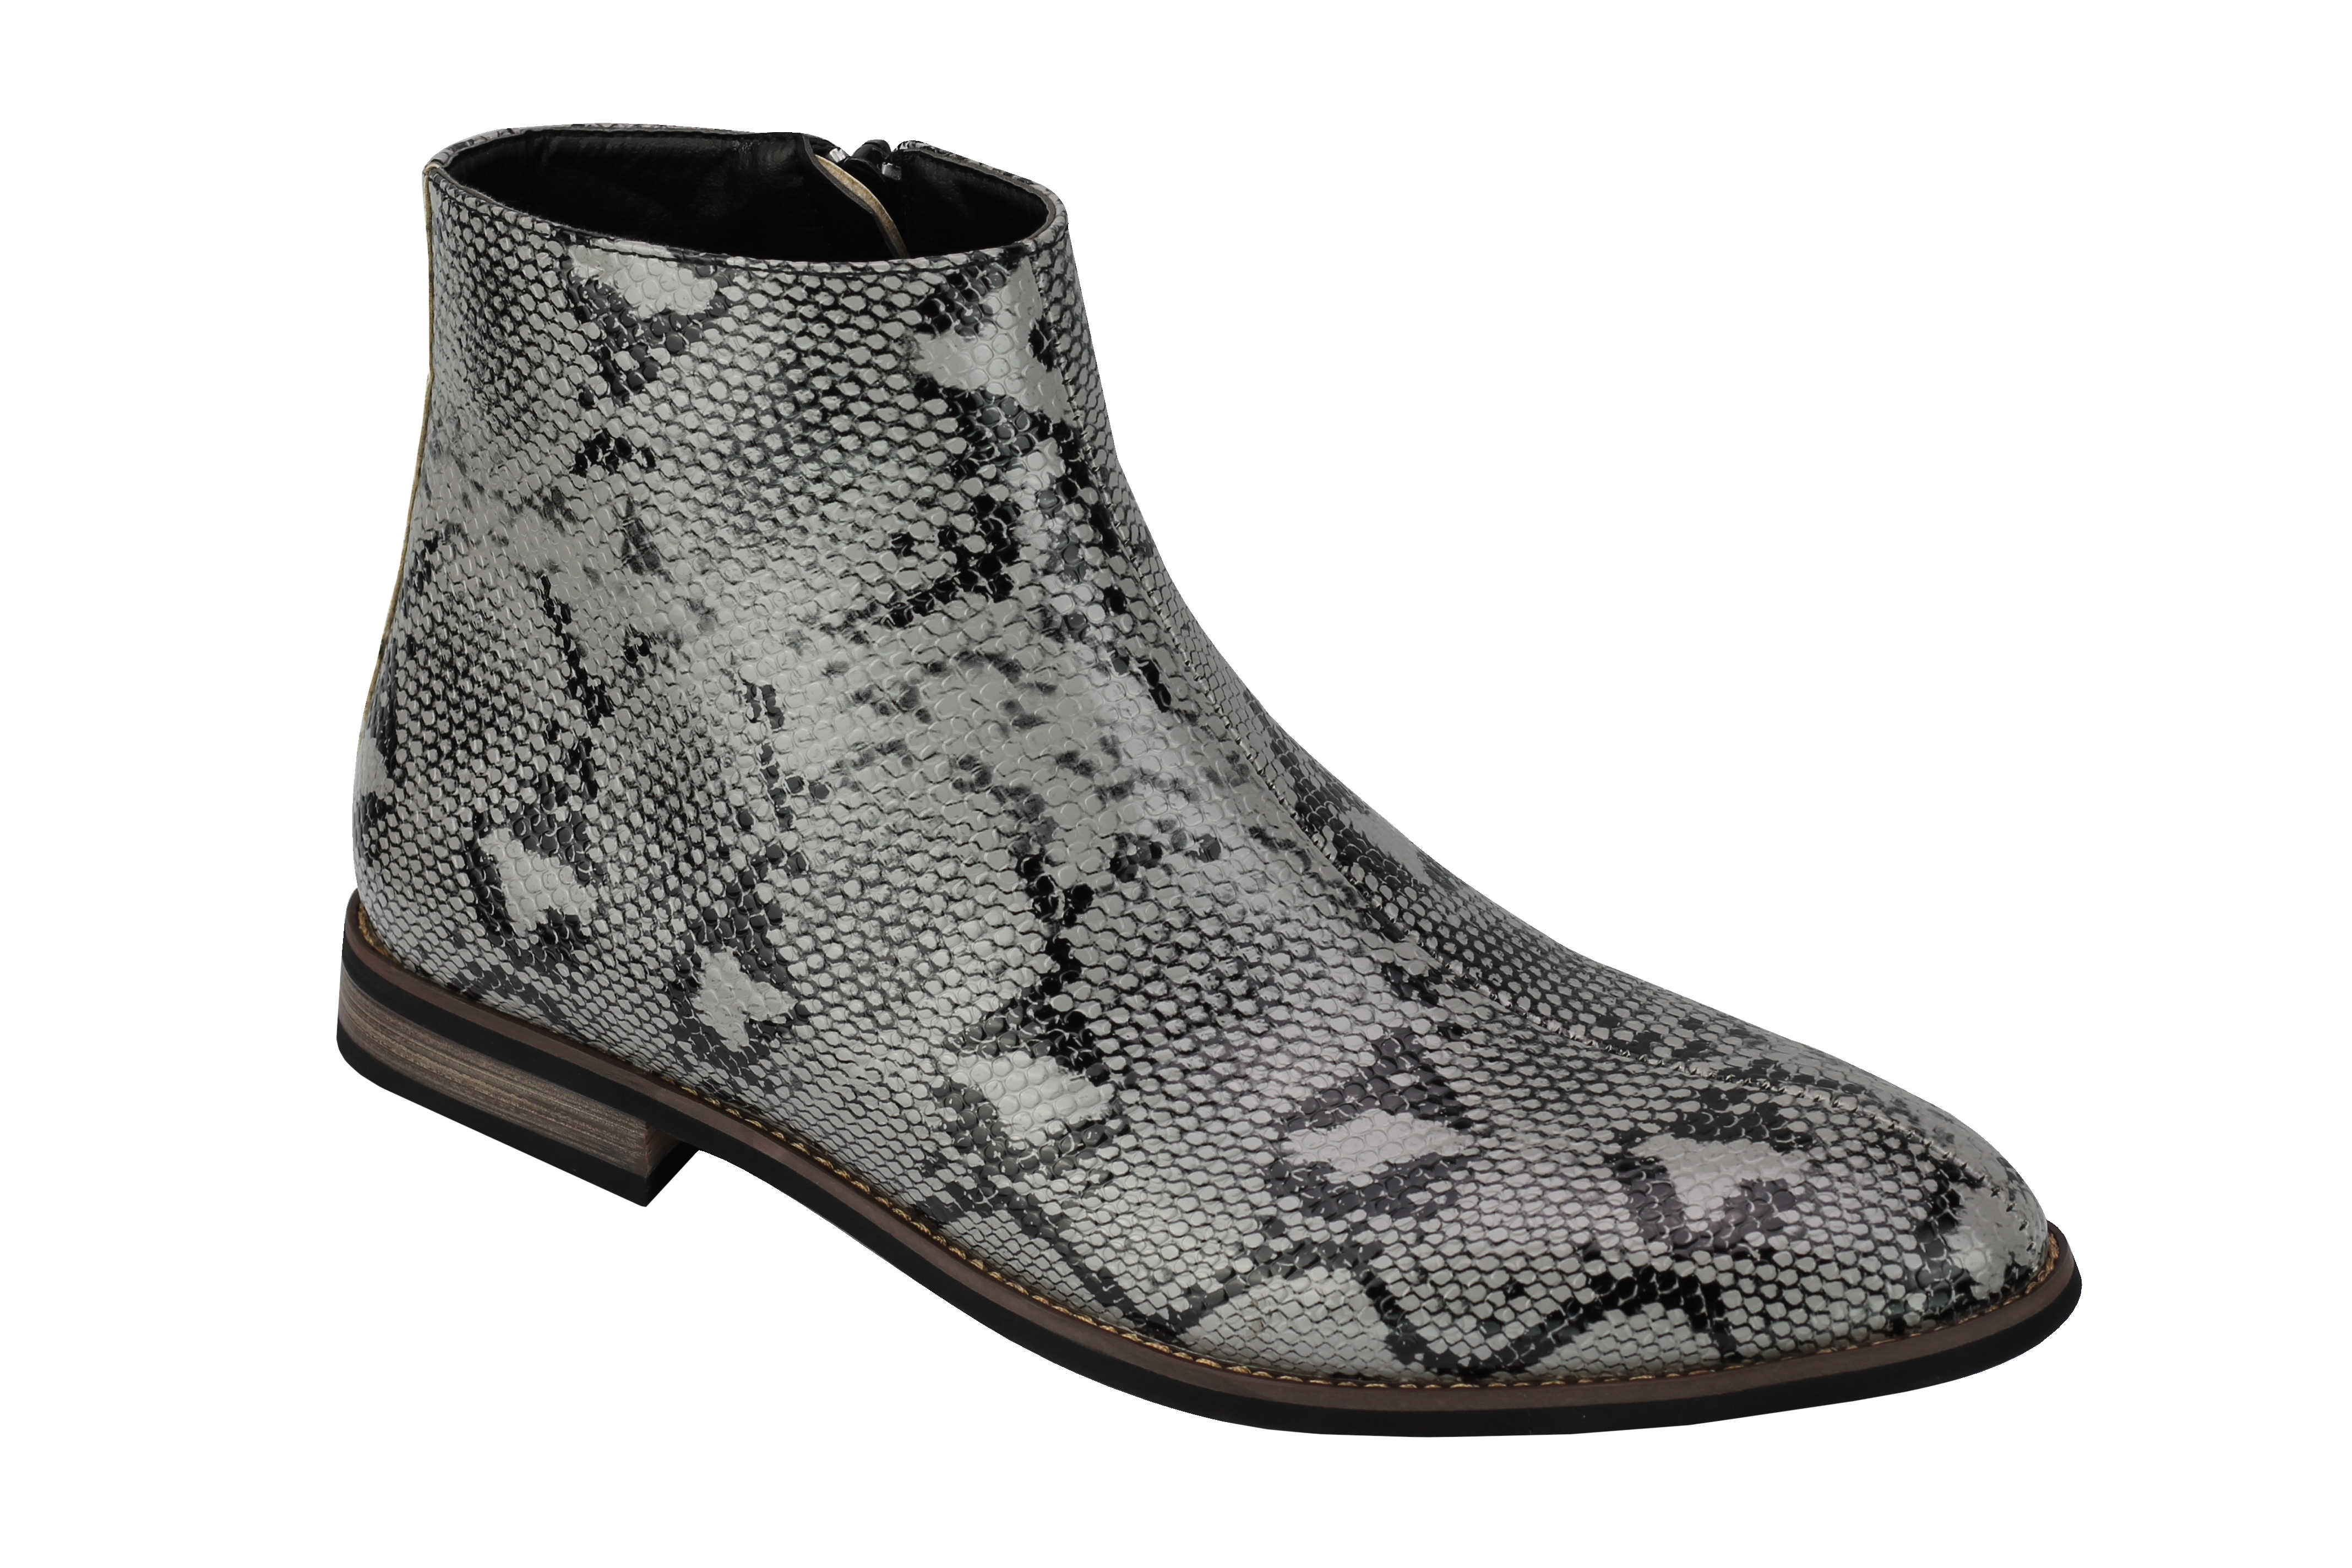 Mens Faux Leather Shiny Snake skin Print Ankle Boots Zip Chelsea Dealer Shoes | eBay